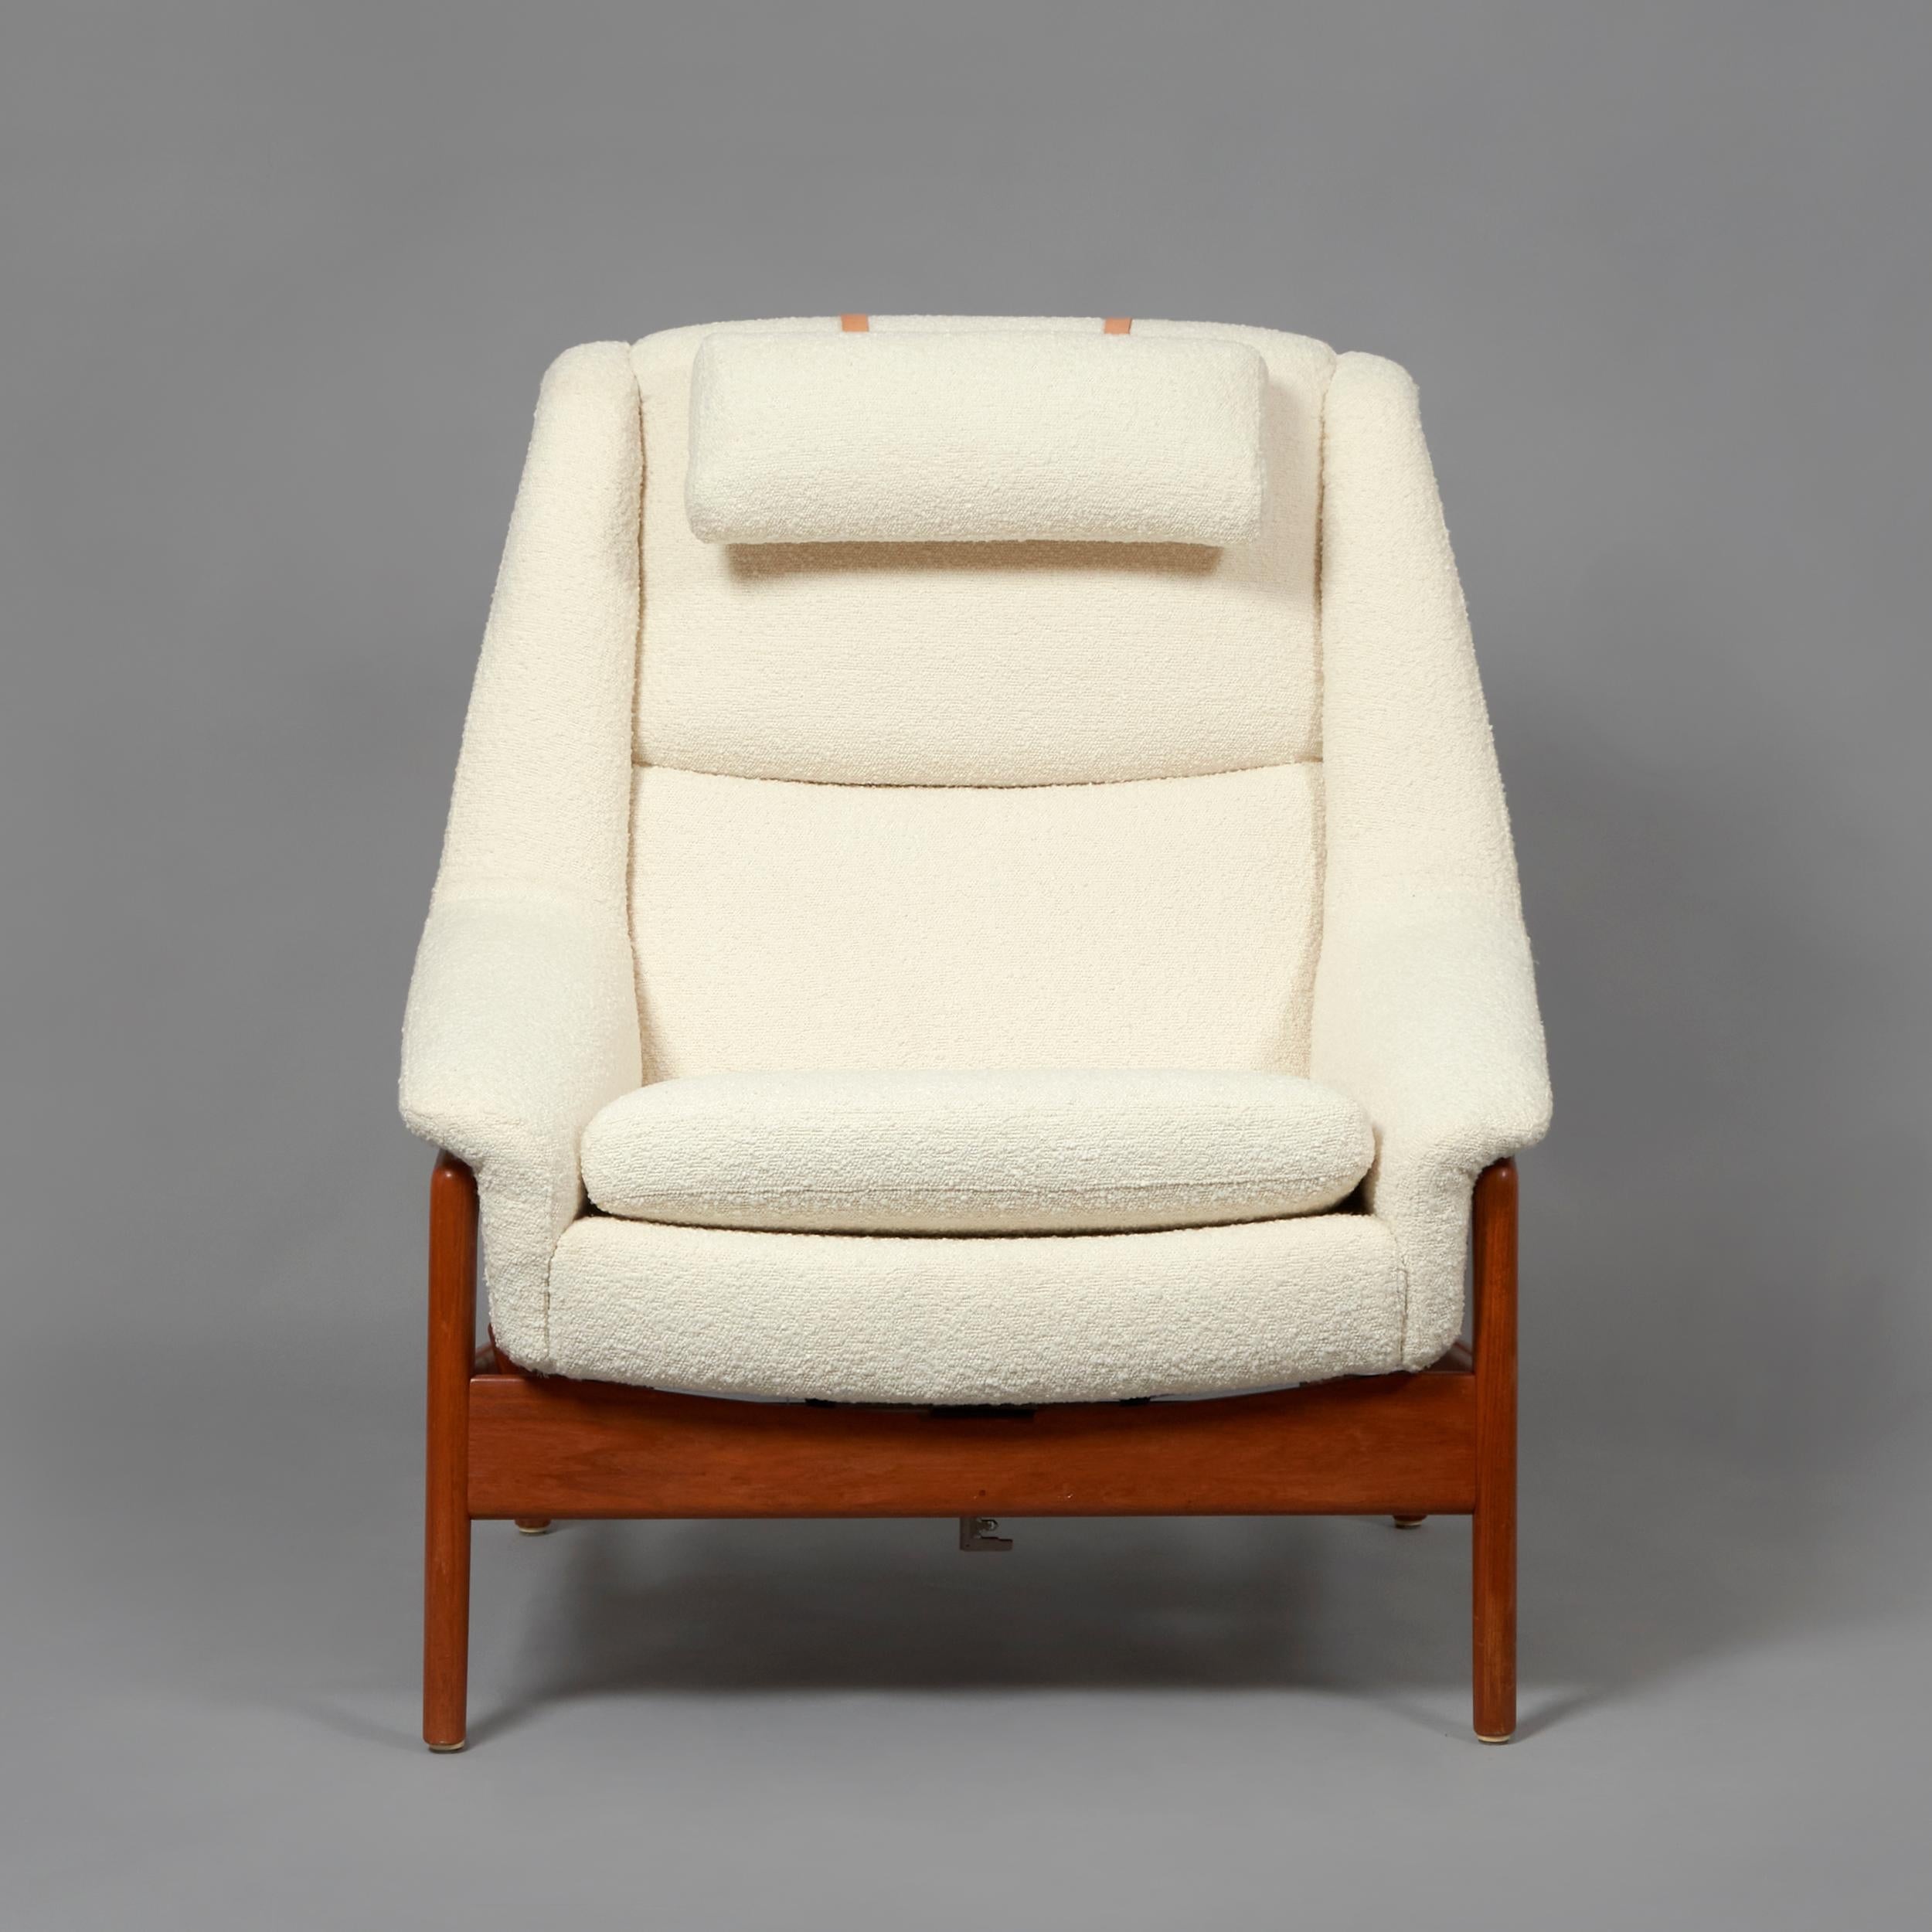 Recliner armchair with Ottoman designed by FOlke Ohlsson for Dux, Ljungs Industrier AB. Teak wood and upholstery. Excellent condition restored and reupholstered. Sweden 1960s

FOlke Ohlsson was a Swedish designer considered one of the most